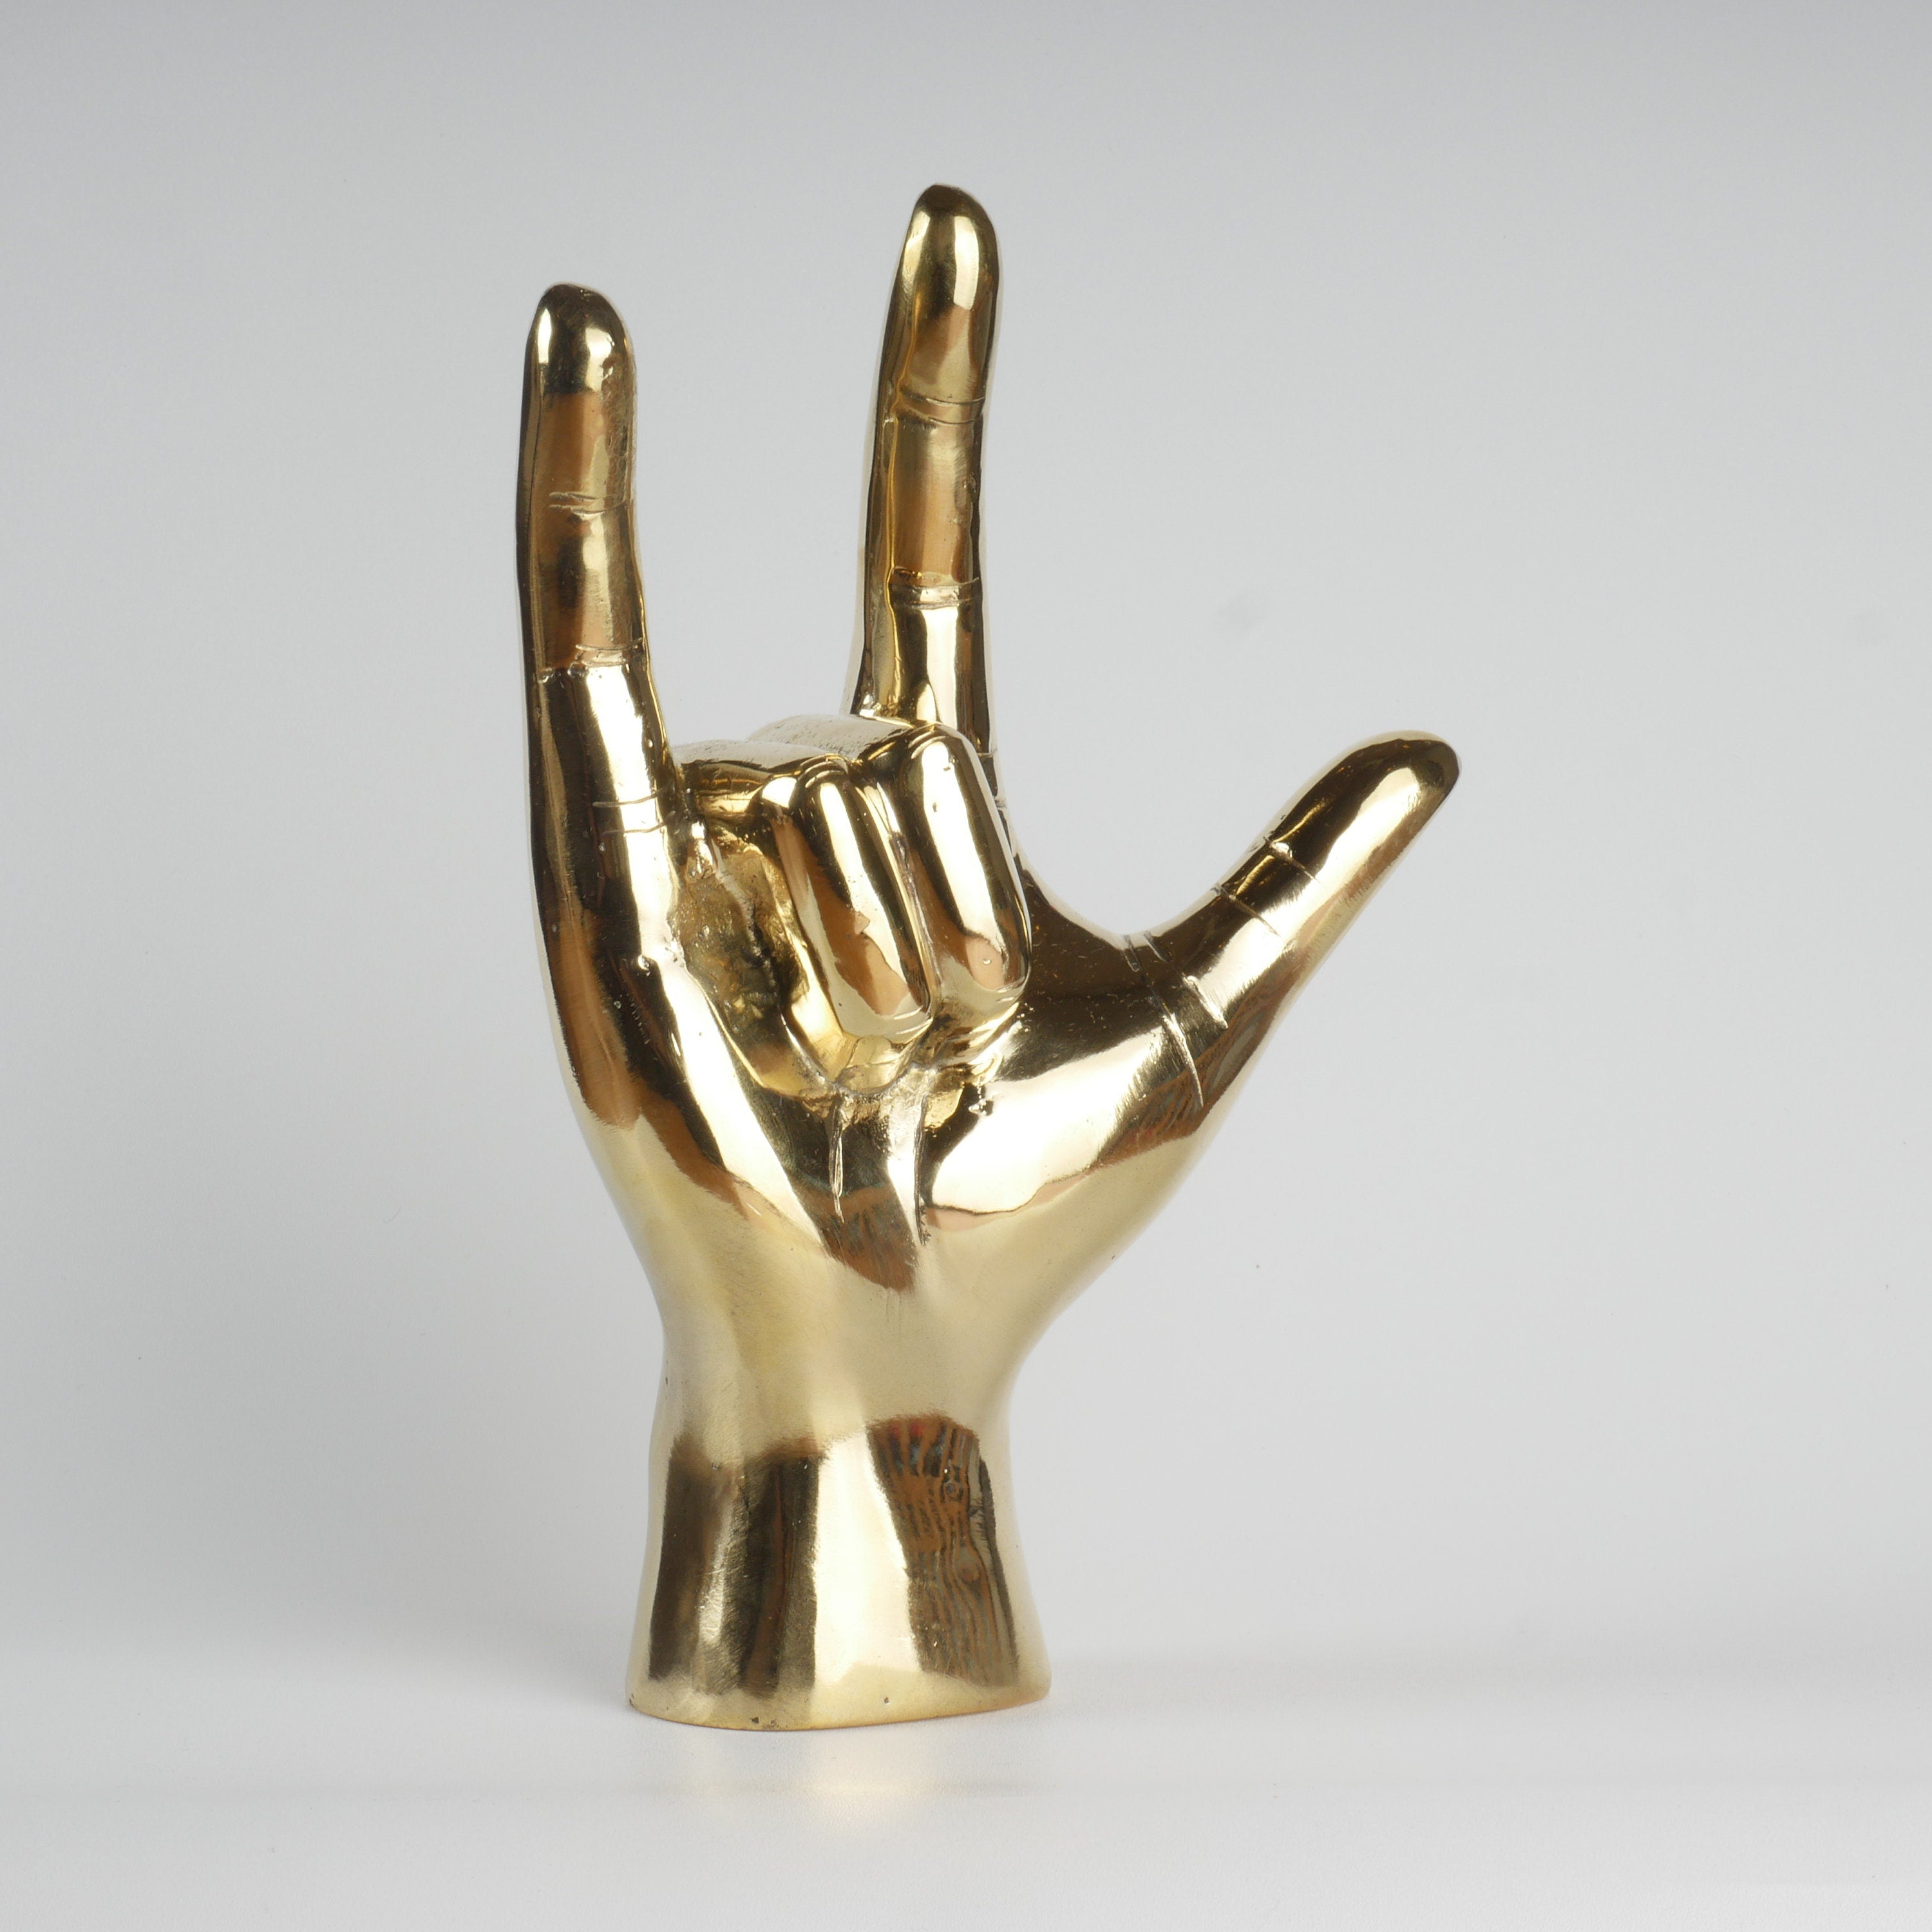 The I LOVE YOU Hand - Brass Hand Sign - Beach Decor - House Warming Gift